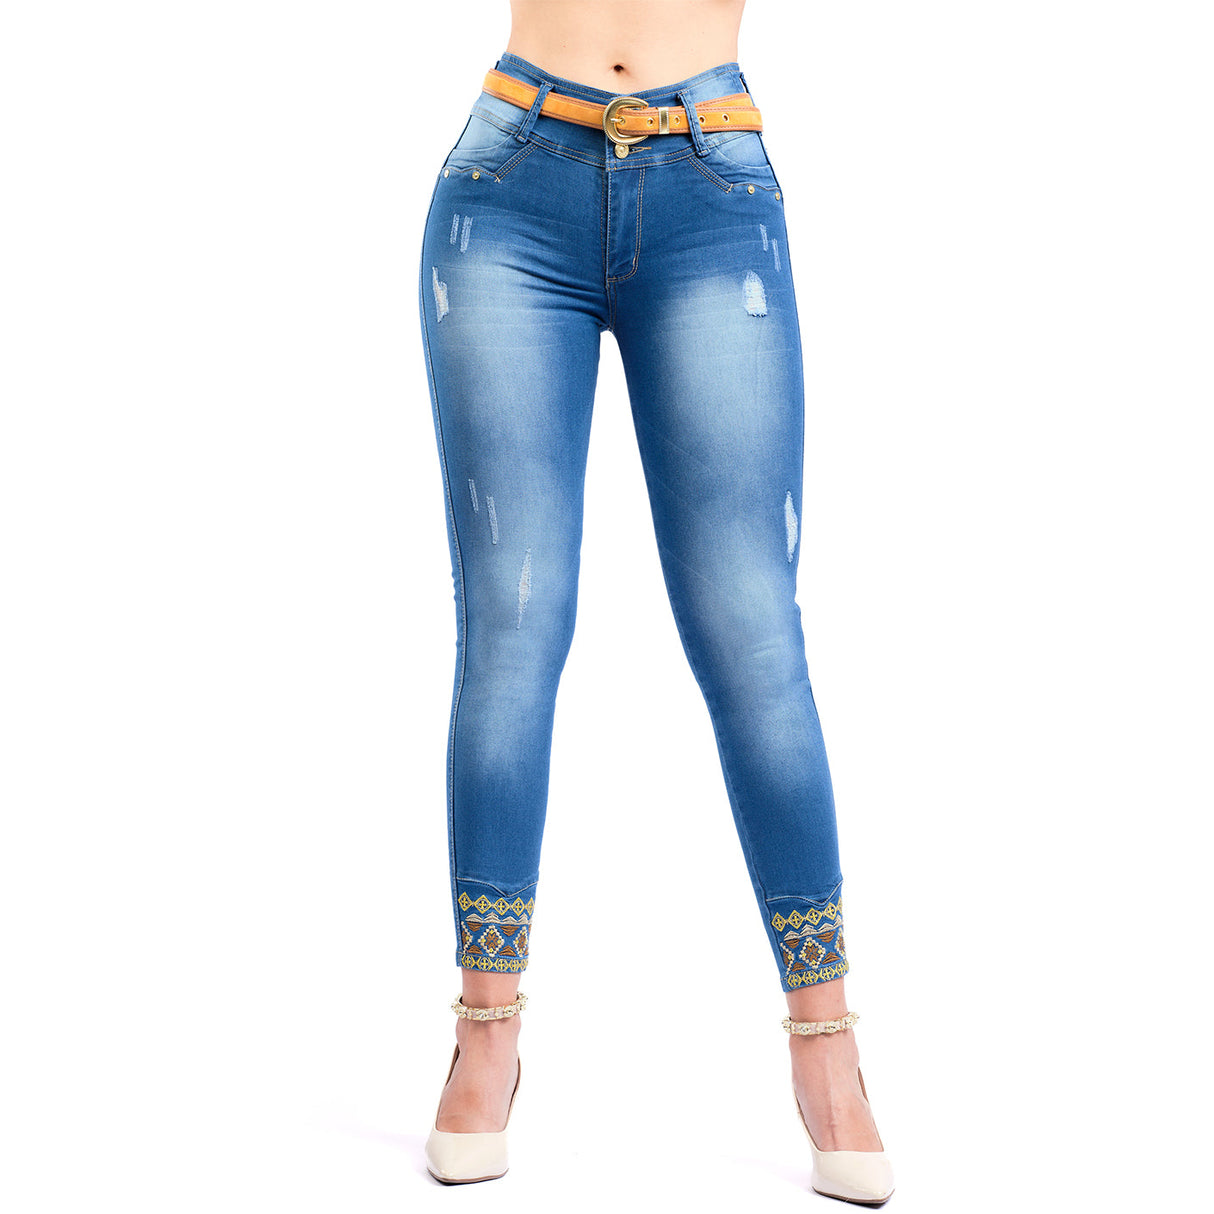 Colombian Butt Lifter Jeans with embroidery – Fajas Colombianas Sale